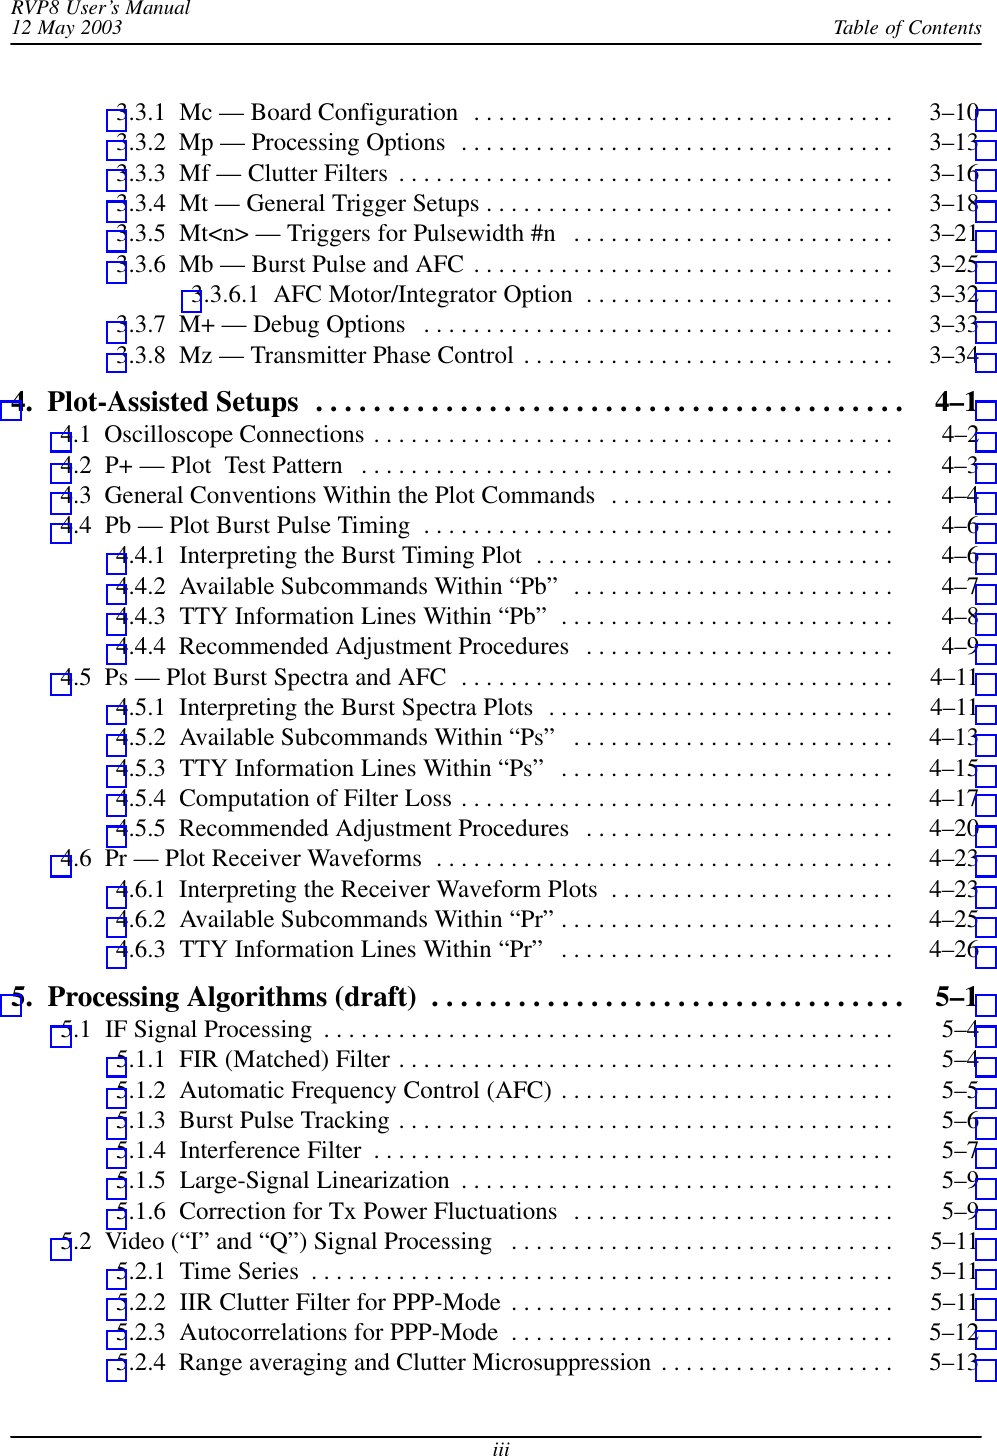 Table of ContentsRVP8 User’s Manual12 May 2003iii3.3.1  Mc — Board Configuration 3–10 . . . . . . . . . . . . . . . . . . . . . . . . . . . . . . . . . . 3.3.2  Mp — Processing Options 3–13 . . . . . . . . . . . . . . . . . . . . . . . . . . . . . . . . . . . 3.3.3  Mf — Clutter Filters 3–16 . . . . . . . . . . . . . . . . . . . . . . . . . . . . . . . . . . . . . . . . 3.3.4  Mt — General Trigger Setups 3–18 . . . . . . . . . . . . . . . . . . . . . . . . . . . . . . . . . 3.3.5  Mt&lt;n&gt; — Triggers for Pulsewidth #n 3–21 . . . . . . . . . . . . . . . . . . . . . . . . . . 3.3.6  Mb — Burst Pulse and AFC 3–25 . . . . . . . . . . . . . . . . . . . . . . . . . . . . . . . . . . 3.3.6.1  AFC Motor/Integrator Option 3–32 . . . . . . . . . . . . . . . . . . . . . . . . . 3.3.7  M+ — Debug Options 3–33 . . . . . . . . . . . . . . . . . . . . . . . . . . . . . . . . . . . . . . 3.3.8  Mz — Transmitter Phase Control 3–34 . . . . . . . . . . . . . . . . . . . . . . . . . . . . . . 4.  Plot-Assisted Setups 4–1 . . . . . . . . . . . . . . . . . . . . . . . . . . . . . . . . . . . . . . . . . 4.1  Oscilloscope Connections 4–2 . . . . . . . . . . . . . . . . . . . . . . . . . . . . . . . . . . . . . . . . . . 4.2  P+ — Plot  Test Pattern 4–3 . . . . . . . . . . . . . . . . . . . . . . . . . . . . . . . . . . . . . . . . . . . 4.3  General Conventions Within the Plot Commands 4–4 . . . . . . . . . . . . . . . . . . . . . . . 4.4  Pb — Plot Burst Pulse Timing 4–6 . . . . . . . . . . . . . . . . . . . . . . . . . . . . . . . . . . . . . . 4.4.1  Interpreting the Burst Timing Plot 4–6 . . . . . . . . . . . . . . . . . . . . . . . . . . . . . 4.4.2  Available Subcommands Within “Pb” 4–7 . . . . . . . . . . . . . . . . . . . . . . . . . . 4.4.3  TTY Information Lines Within “Pb” 4–8 . . . . . . . . . . . . . . . . . . . . . . . . . . . 4.4.4  Recommended Adjustment Procedures 4–9 . . . . . . . . . . . . . . . . . . . . . . . . . 4.5  Ps — Plot Burst Spectra and AFC 4–11 . . . . . . . . . . . . . . . . . . . . . . . . . . . . . . . . . . . 4.5.1  Interpreting the Burst Spectra Plots 4–11 . . . . . . . . . . . . . . . . . . . . . . . . . . . . 4.5.2  Available Subcommands Within “Ps” 4–13 . . . . . . . . . . . . . . . . . . . . . . . . . . 4.5.3  TTY Information Lines Within “Ps” 4–15 . . . . . . . . . . . . . . . . . . . . . . . . . . . 4.5.4  Computation of Filter Loss 4–17 . . . . . . . . . . . . . . . . . . . . . . . . . . . . . . . . . . . 4.5.5  Recommended Adjustment Procedures 4–20 . . . . . . . . . . . . . . . . . . . . . . . . . 4.6  Pr — Plot Receiver Waveforms 4–23 . . . . . . . . . . . . . . . . . . . . . . . . . . . . . . . . . . . . . 4.6.1  Interpreting the Receiver Waveform Plots 4–23 . . . . . . . . . . . . . . . . . . . . . . . 4.6.2  Available Subcommands Within “Pr” 4–25 . . . . . . . . . . . . . . . . . . . . . . . . . . . 4.6.3  TTY Information Lines Within “Pr” 4–26 . . . . . . . . . . . . . . . . . . . . . . . . . . . 5.  Processing Algorithms (draft) 5–1 . . . . . . . . . . . . . . . . . . . . . . . . . . . . . . . . . 5.1  IF Signal Processing 5–4 . . . . . . . . . . . . . . . . . . . . . . . . . . . . . . . . . . . . . . . . . . . . . . 5.1.1  FIR (Matched) Filter 5–4 . . . . . . . . . . . . . . . . . . . . . . . . . . . . . . . . . . . . . . . . 5.1.2  Automatic Frequency Control (AFC) 5–5 . . . . . . . . . . . . . . . . . . . . . . . . . . . 5.1.3  Burst Pulse Tracking 5–6 . . . . . . . . . . . . . . . . . . . . . . . . . . . . . . . . . . . . . . . . 5.1.4  Interference Filter 5–7 . . . . . . . . . . . . . . . . . . . . . . . . . . . . . . . . . . . . . . . . . . 5.1.5  Large-Signal Linearization 5–9 . . . . . . . . . . . . . . . . . . . . . . . . . . . . . . . . . . . 5.1.6  Correction for Tx Power Fluctuations 5–9 . . . . . . . . . . . . . . . . . . . . . . . . . . 5.2  Video (“I” and “Q”) Signal Processing 5–11 . . . . . . . . . . . . . . . . . . . . . . . . . . . . . . . 5.2.1  Time Series 5–11 . . . . . . . . . . . . . . . . . . . . . . . . . . . . . . . . . . . . . . . . . . . . . . . 5.2.2  IIR Clutter Filter for PPP-Mode 5–11 . . . . . . . . . . . . . . . . . . . . . . . . . . . . . . . 5.2.3  Autocorrelations for PPP-Mode 5–12 . . . . . . . . . . . . . . . . . . . . . . . . . . . . . . . 5.2.4  Range averaging and Clutter Microsuppression 5–13 . . . . . . . . . . . . . . . . . . . 